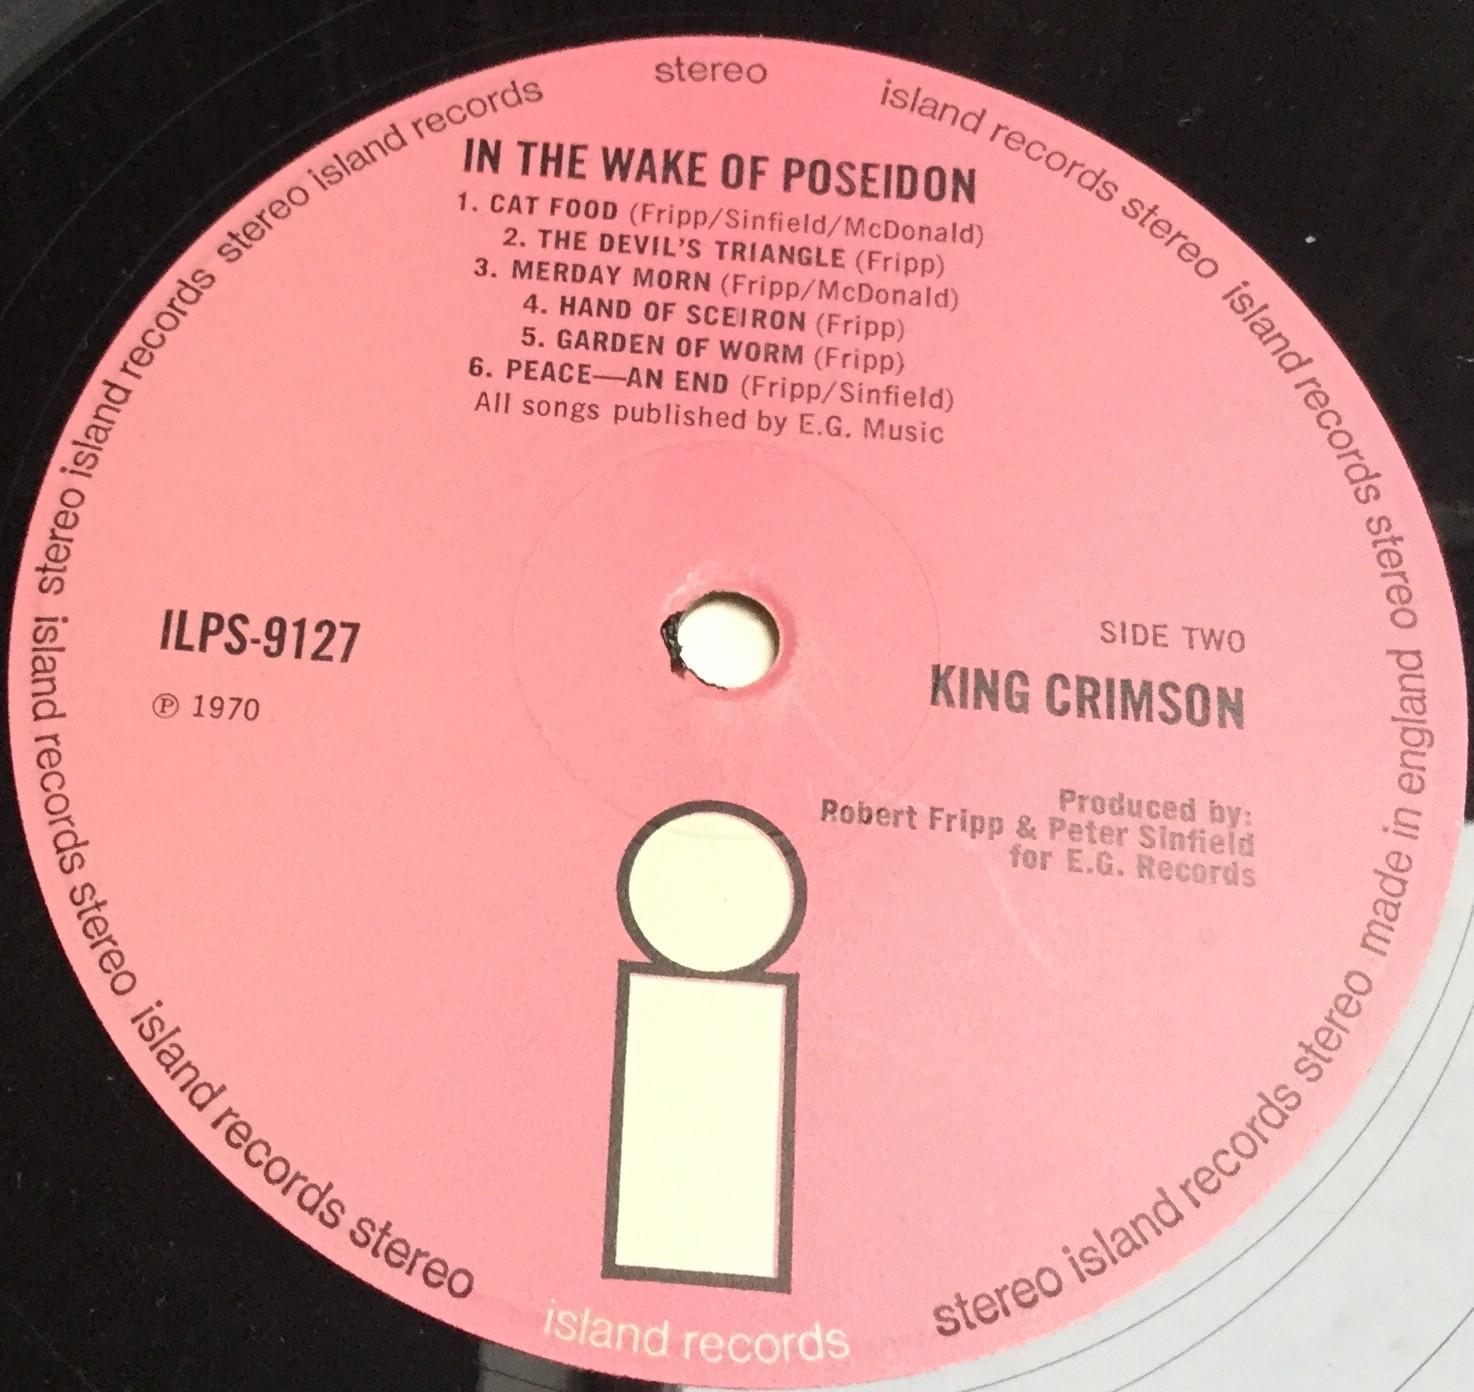 KING CRIMSON 'IN THE WAKE OF POSEIDON' VINYL LP UK FIRST PRESS. First pressing in VG++ condition - Image 4 of 5